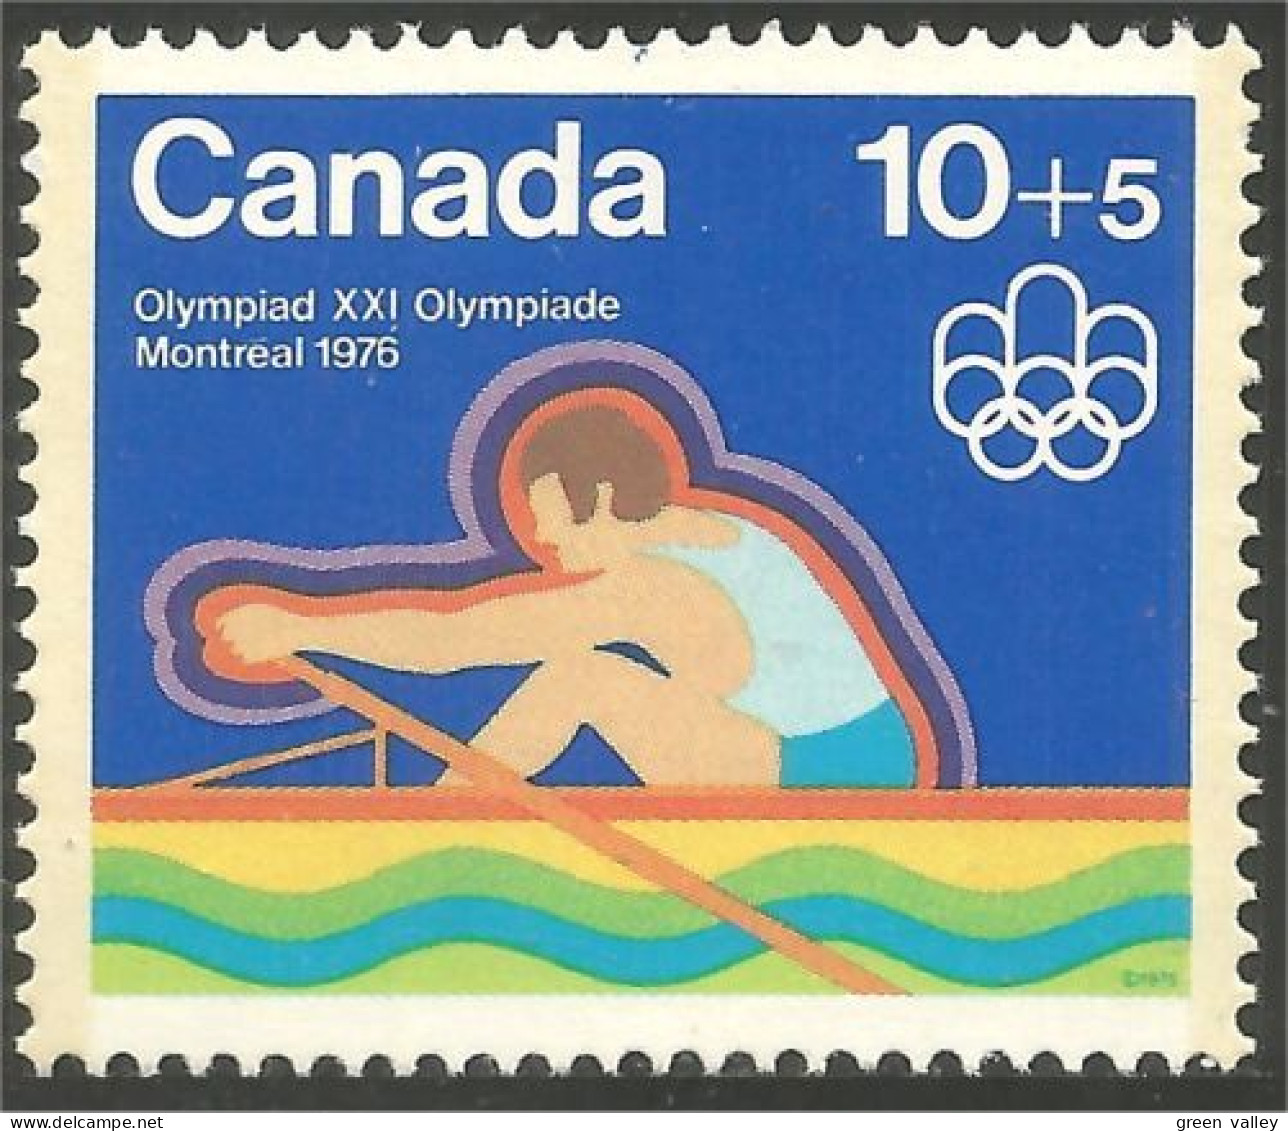 Canada 10c+5c Aviron Rowing Jeux Olympiques Montreal 1976 Olympic Games MNH ** Neuf SC (CB-05c) - Ete 1976: Montréal